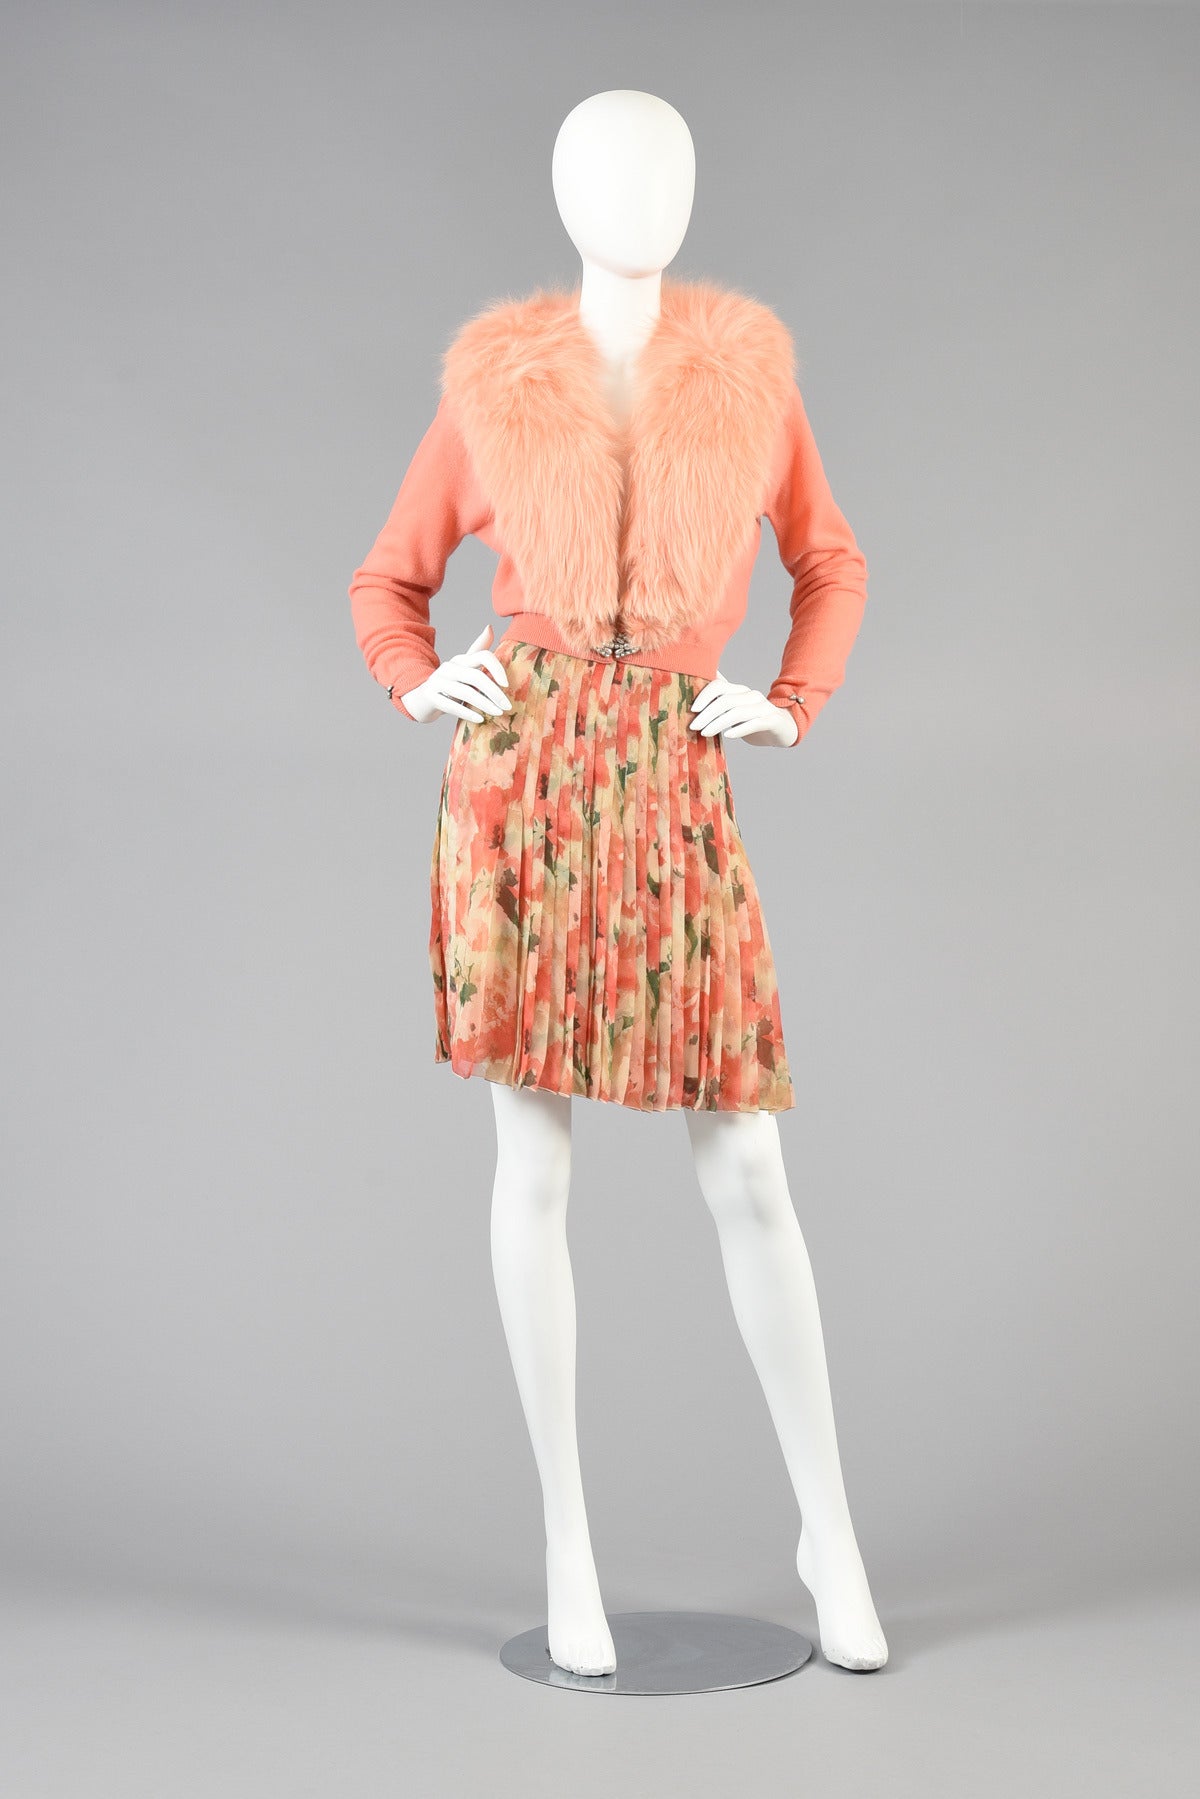 Lovely 1950's salmon colored cashmere and fox fur cardigan by Dalton. Ultra classic and covetable find! Lovely ultra soft 100% cashmere body with pearl clasp at the waist and gathered cuffs. MASSIVE removable fox fur collar. Beautiful lace and mesh